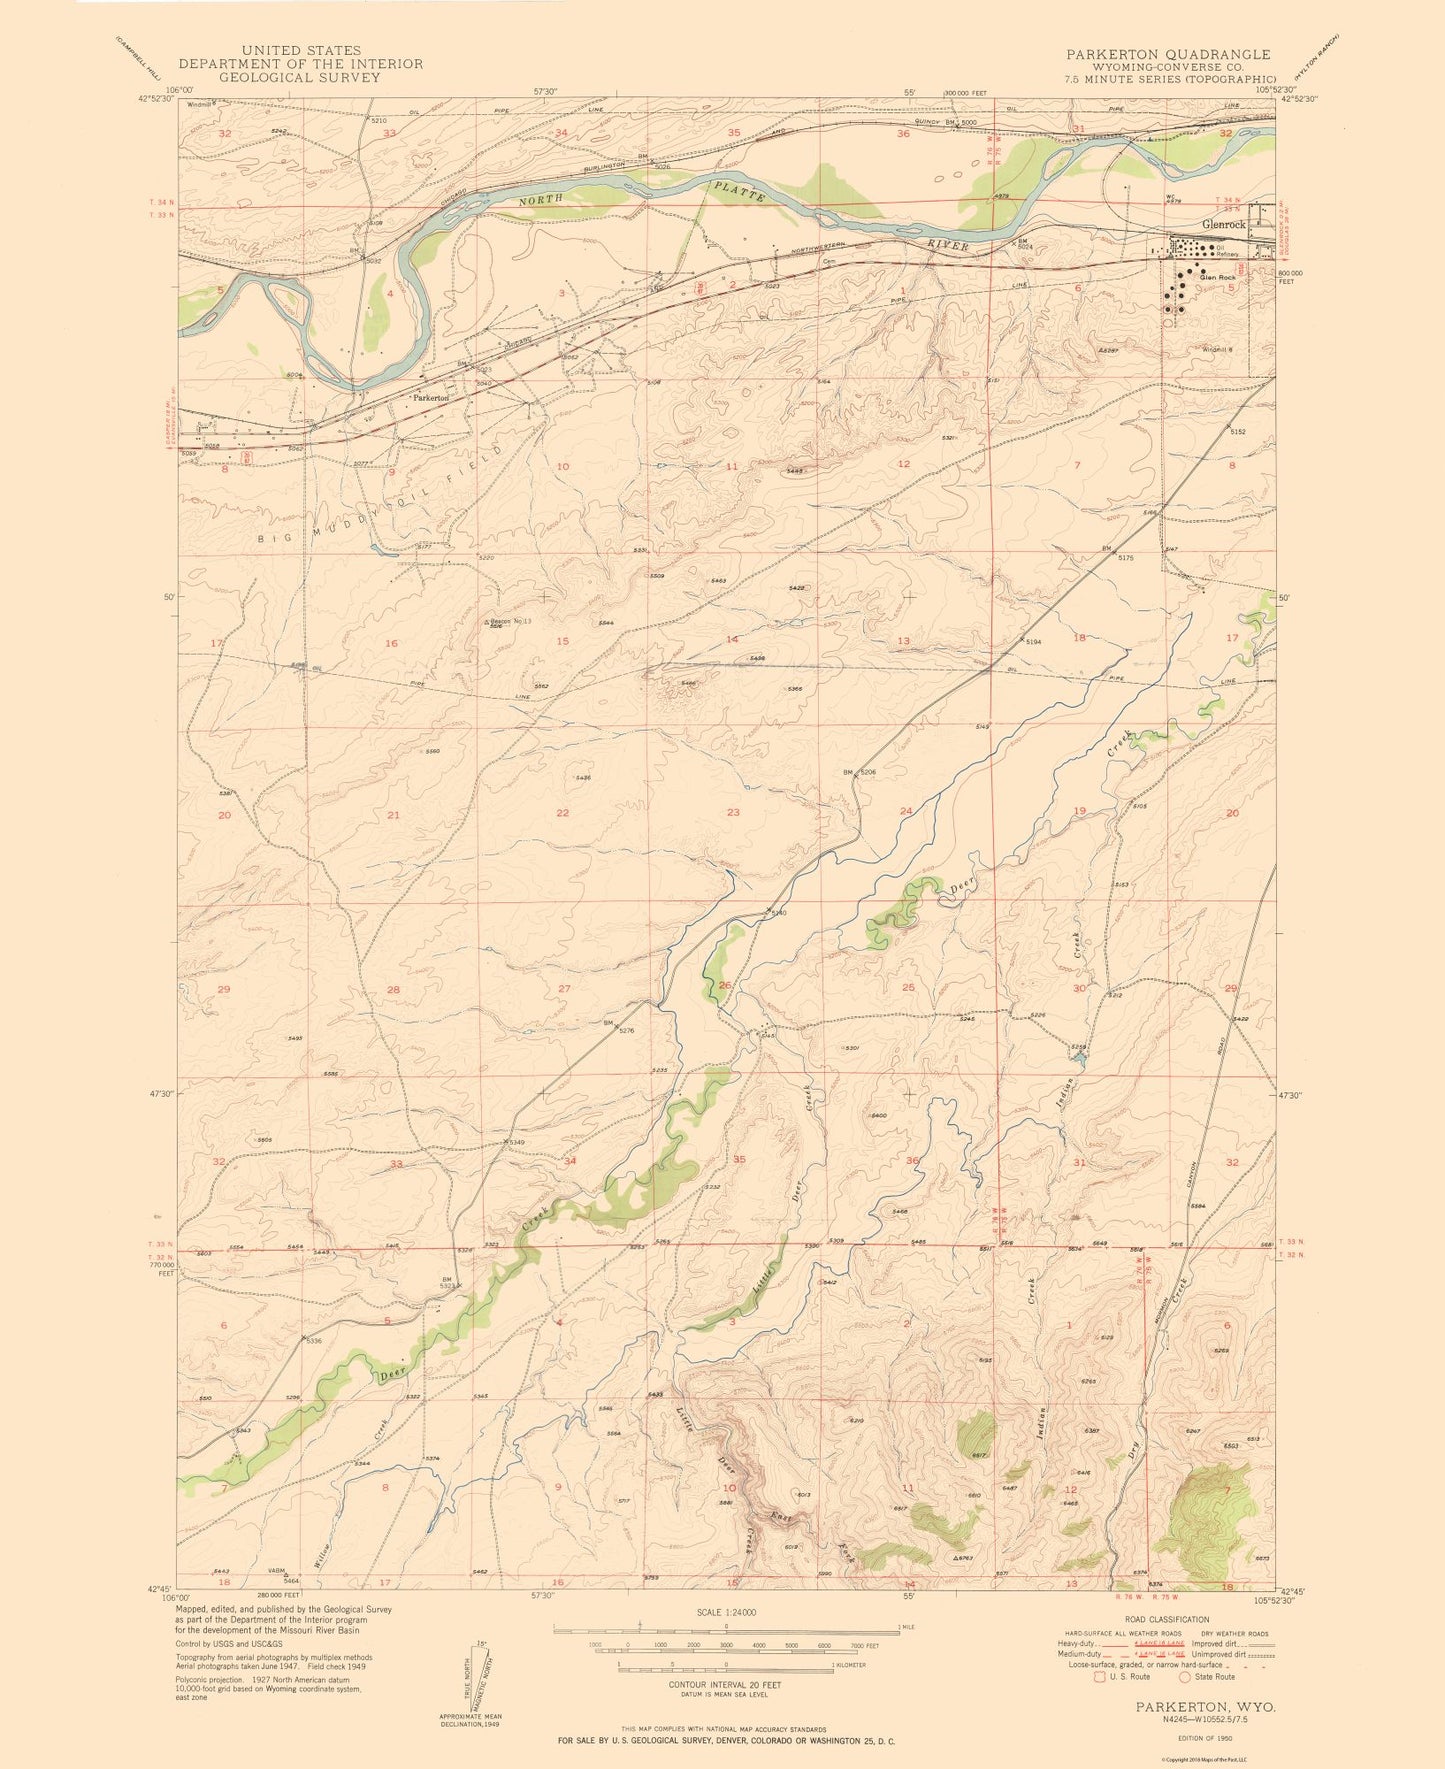 Topographical Map - Parkerton Wyoming Quad - USGS 1950 - 23 x 28.15 - Vintage Wall Art